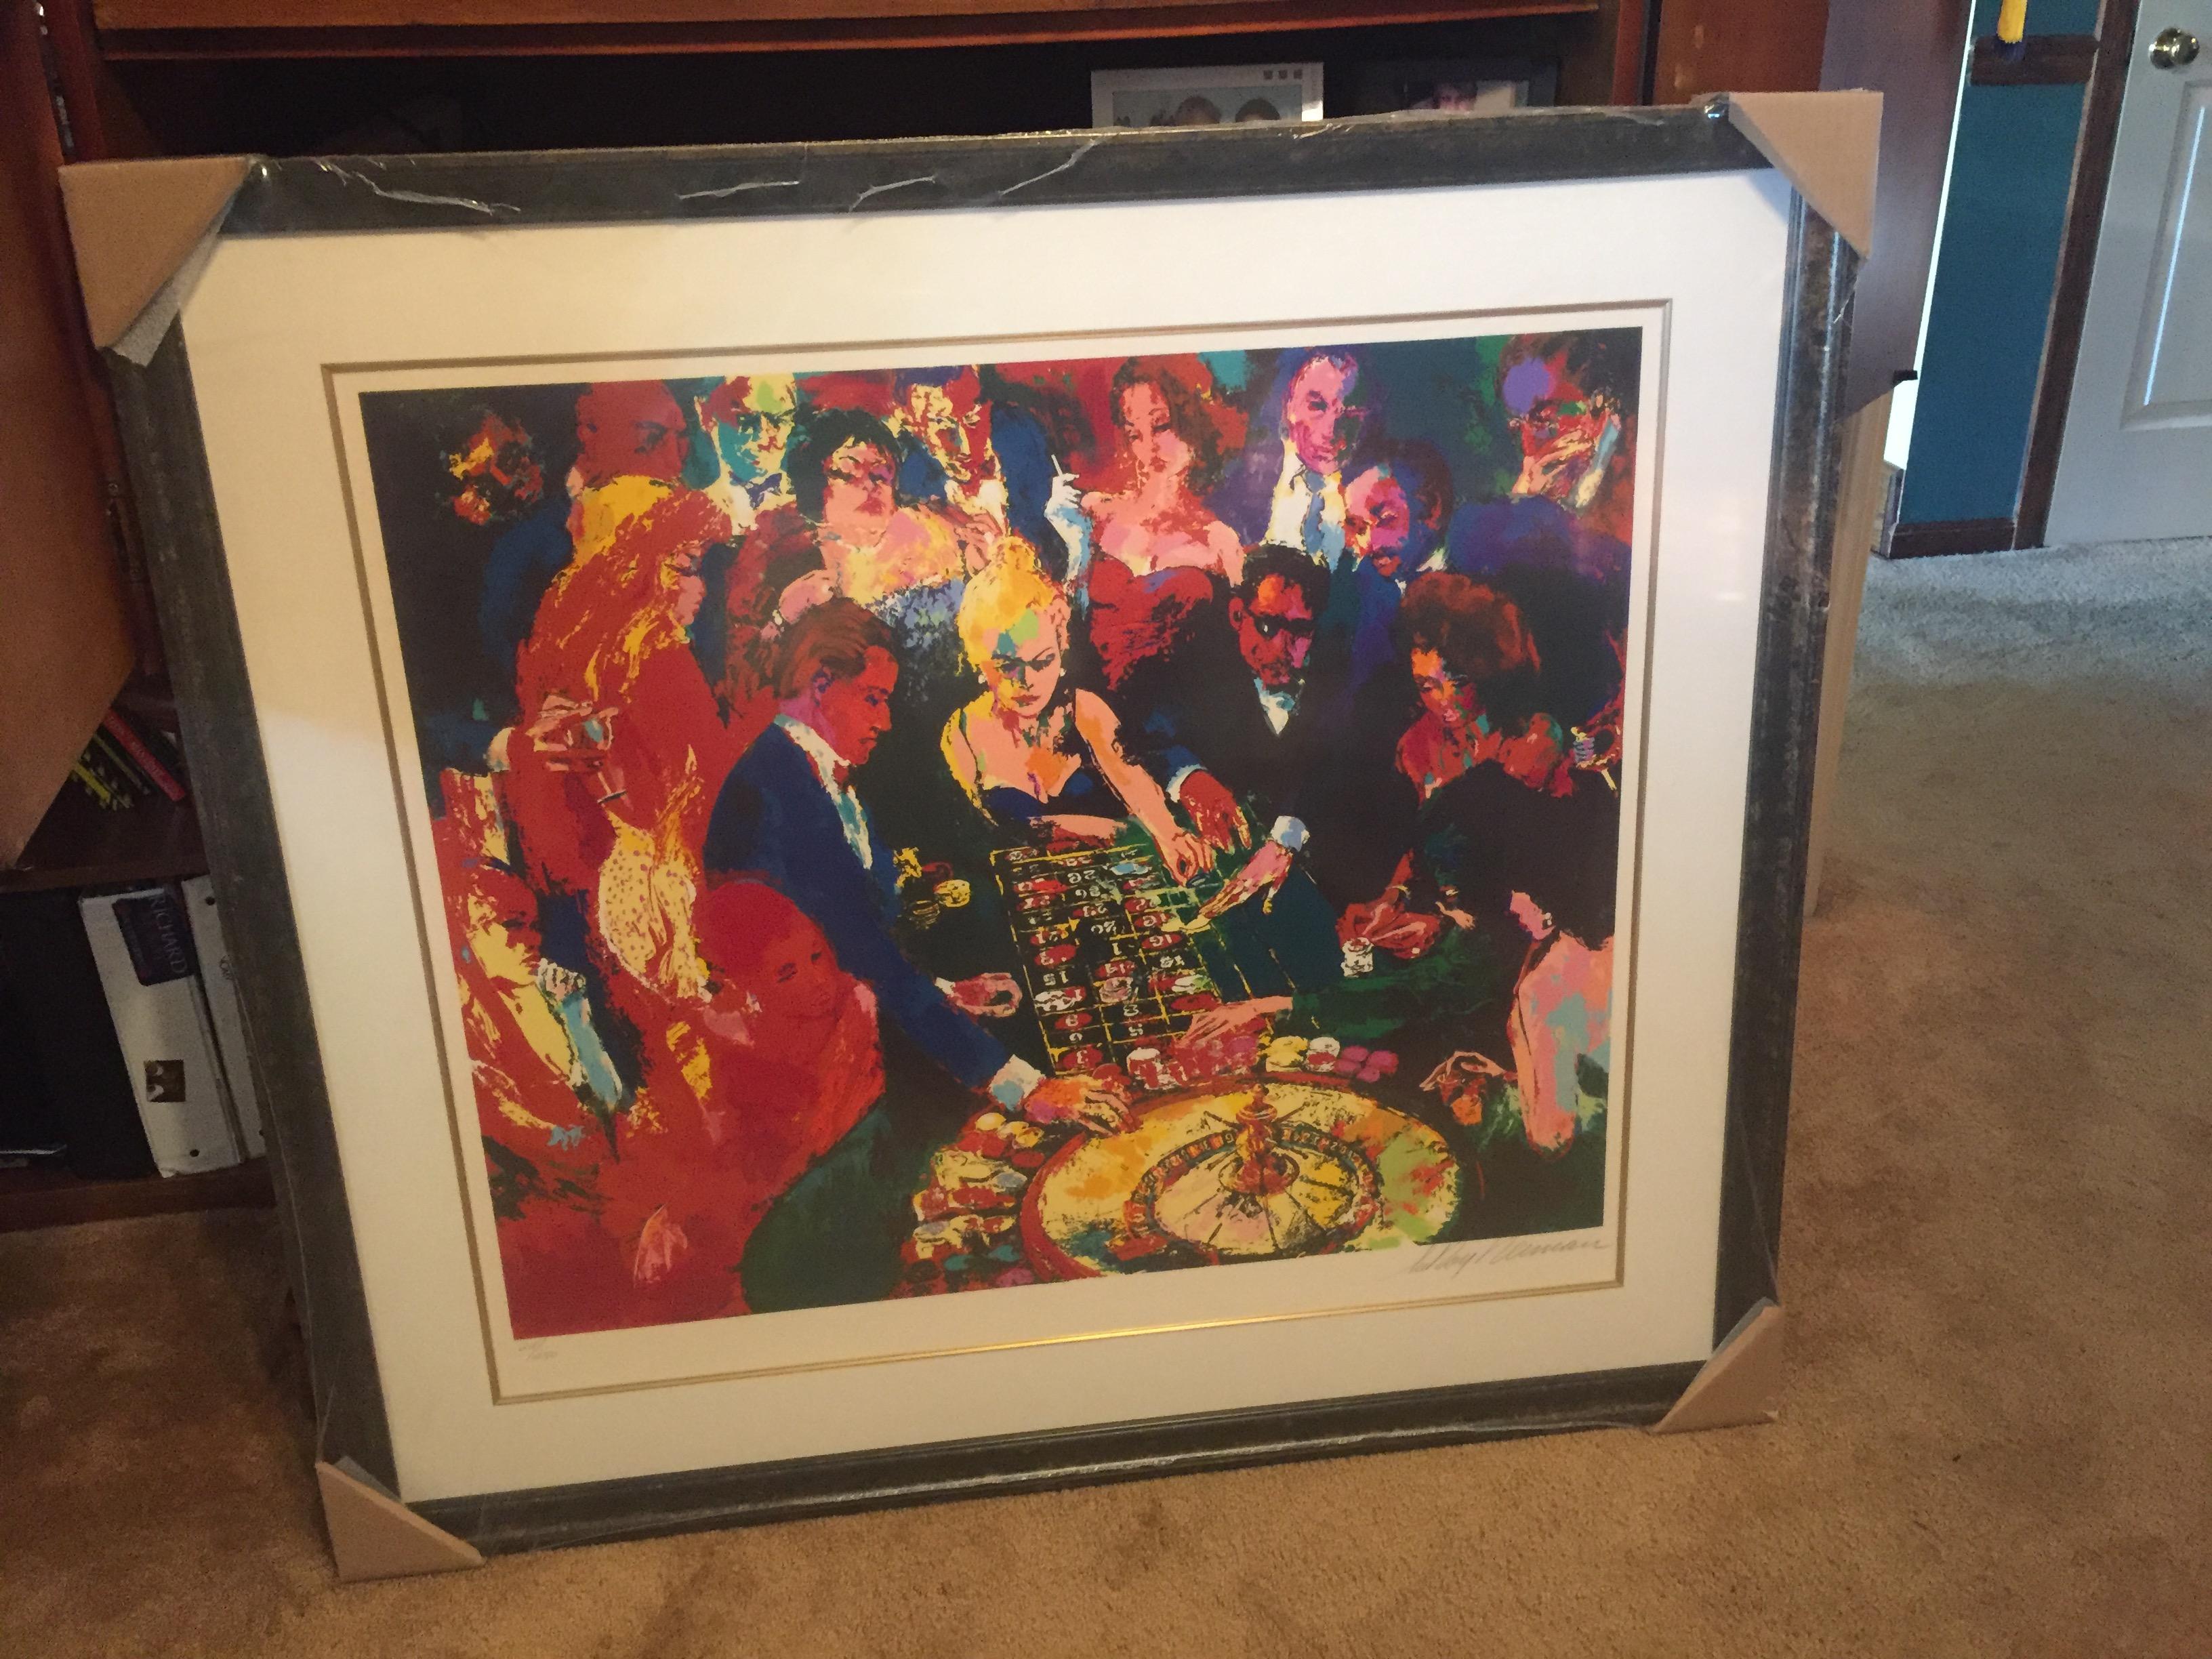 — Artwork comes with a certificate of authenticity and a premium-quality frame
— Signed and numbered by LeRoy Neiman
— Edition size*: 254
— Artworks available*: 218

